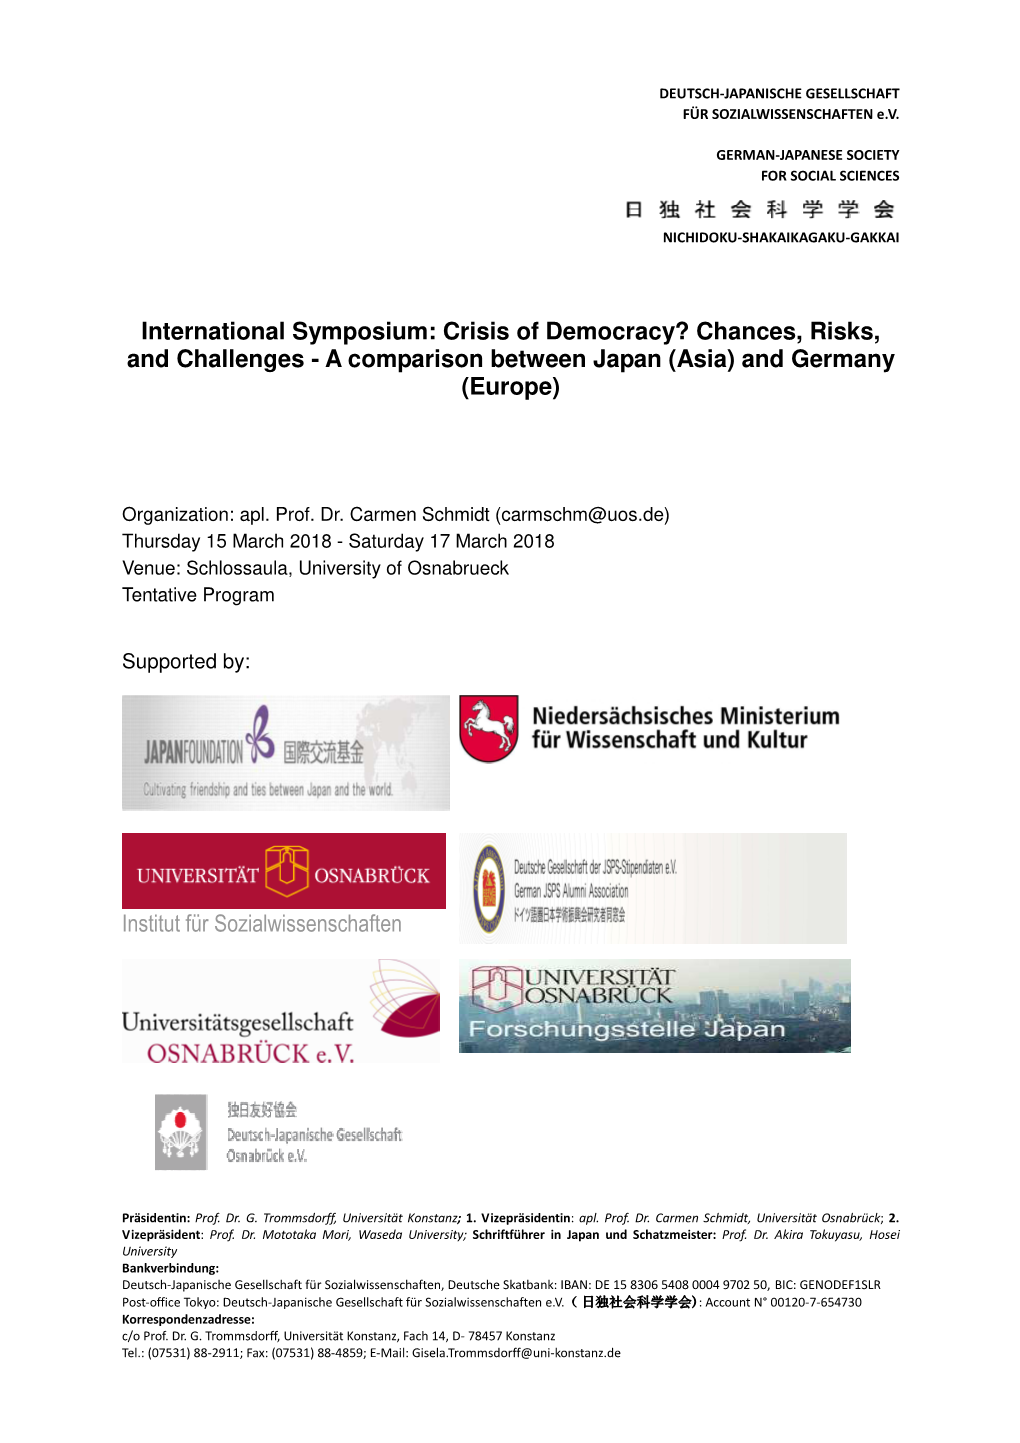 International Symposium: Crisis of Democracy? Chances, Risks, and Challenges - a Comparison Between Japan (Asia) and Germany (Europe)